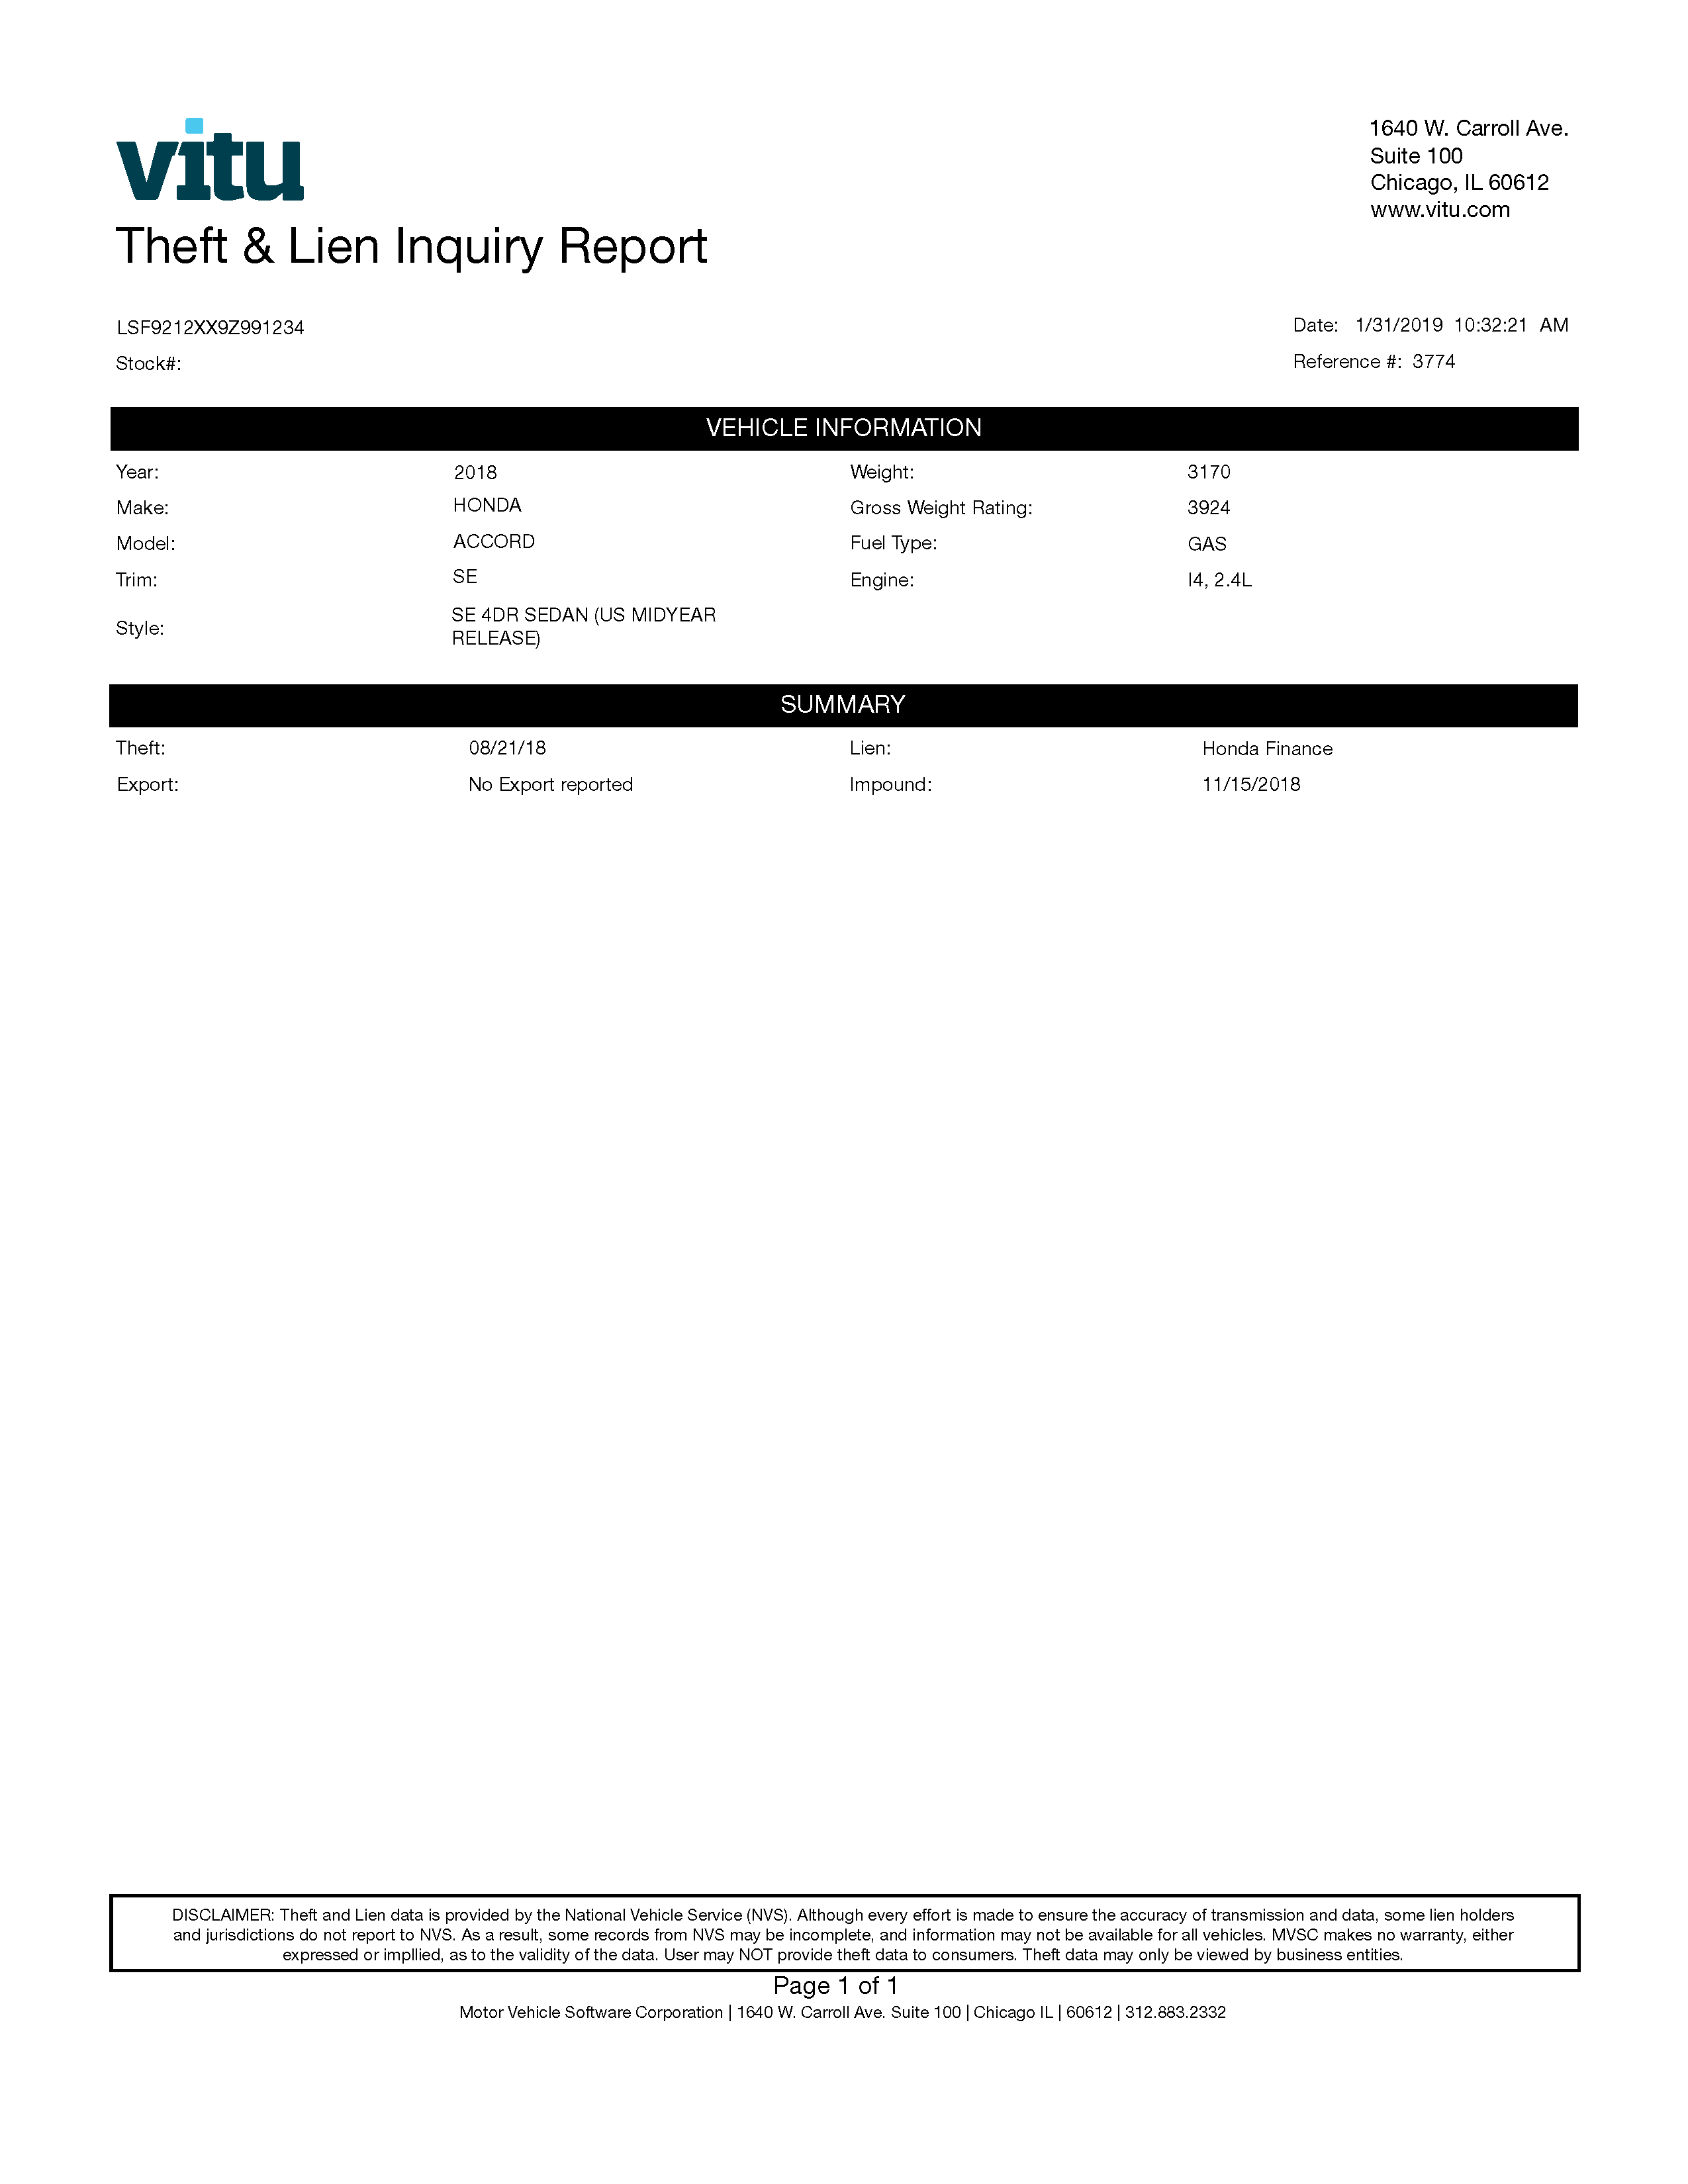 Theft and Lien Report